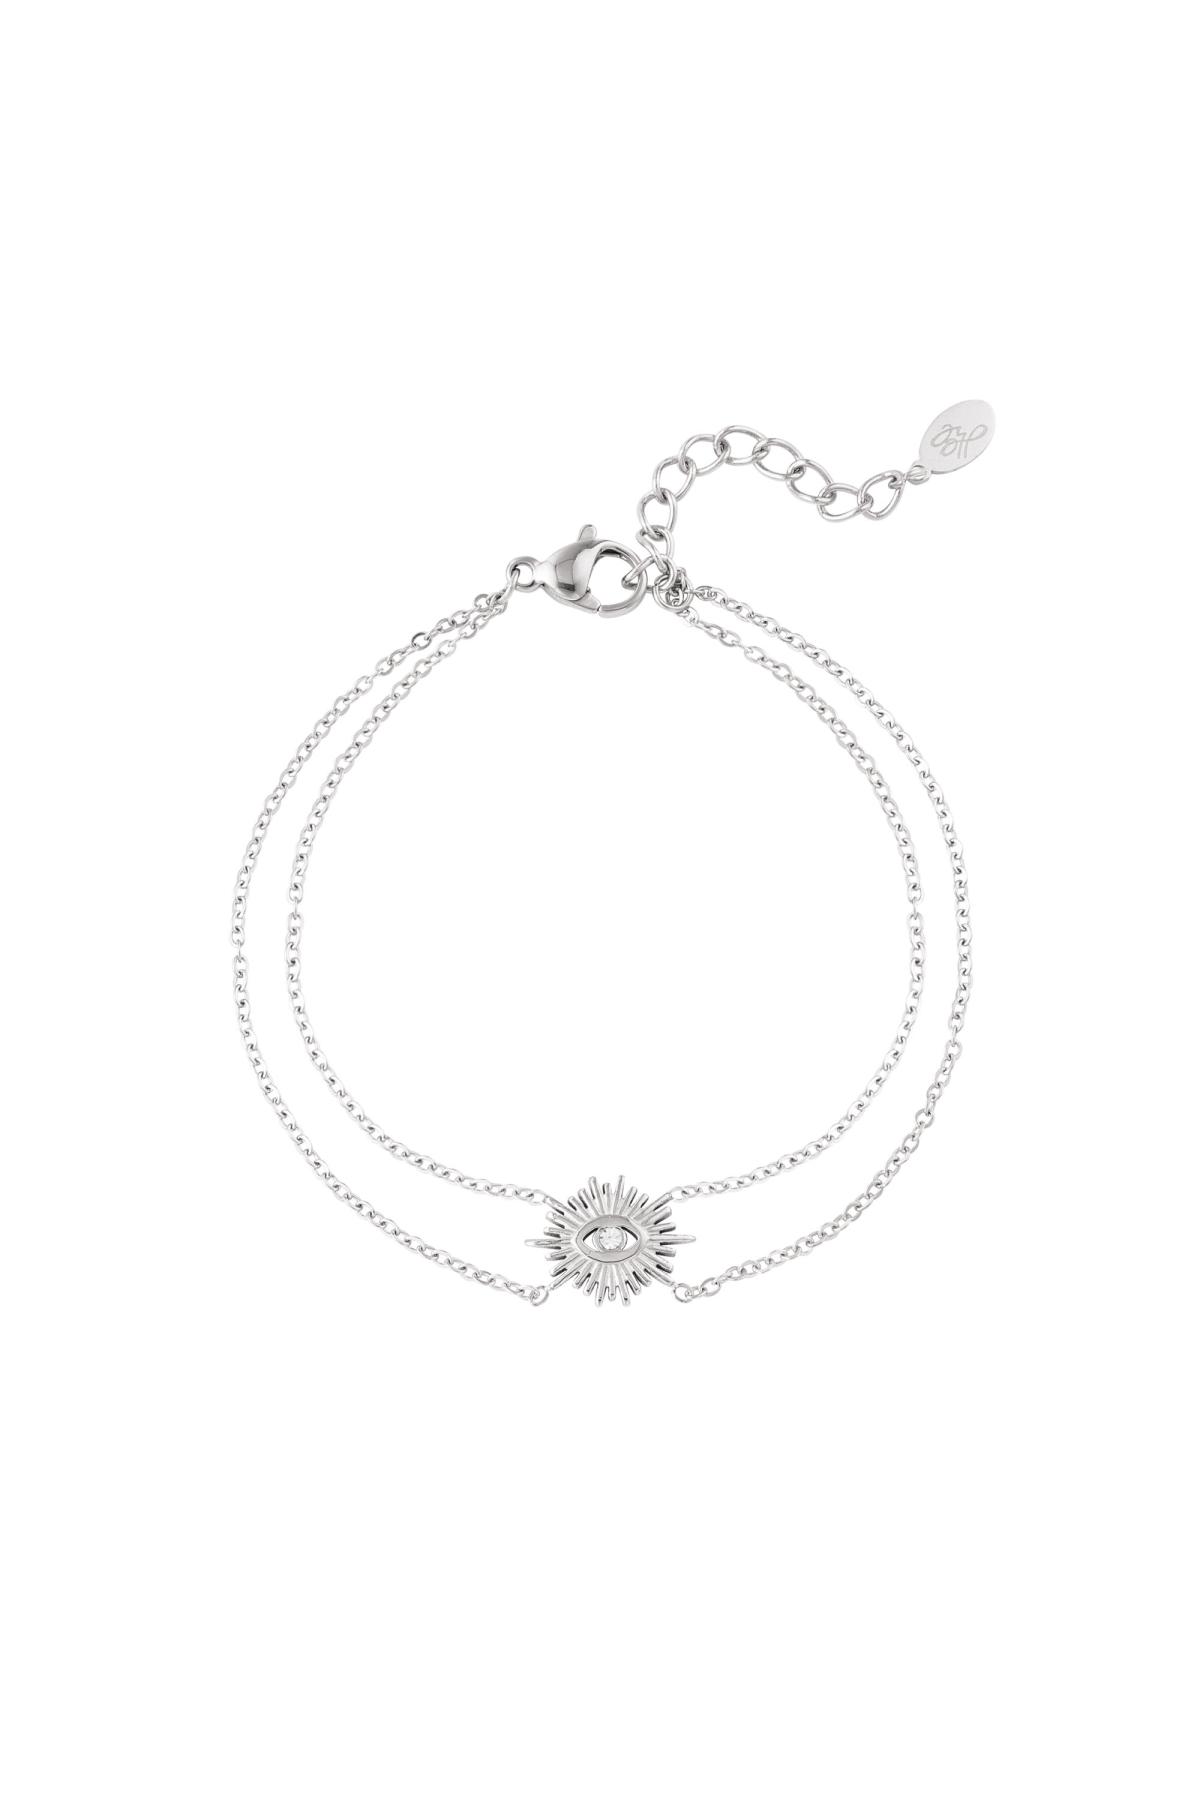 Bracelet double chain with charm Silver Stainless Steel h5 